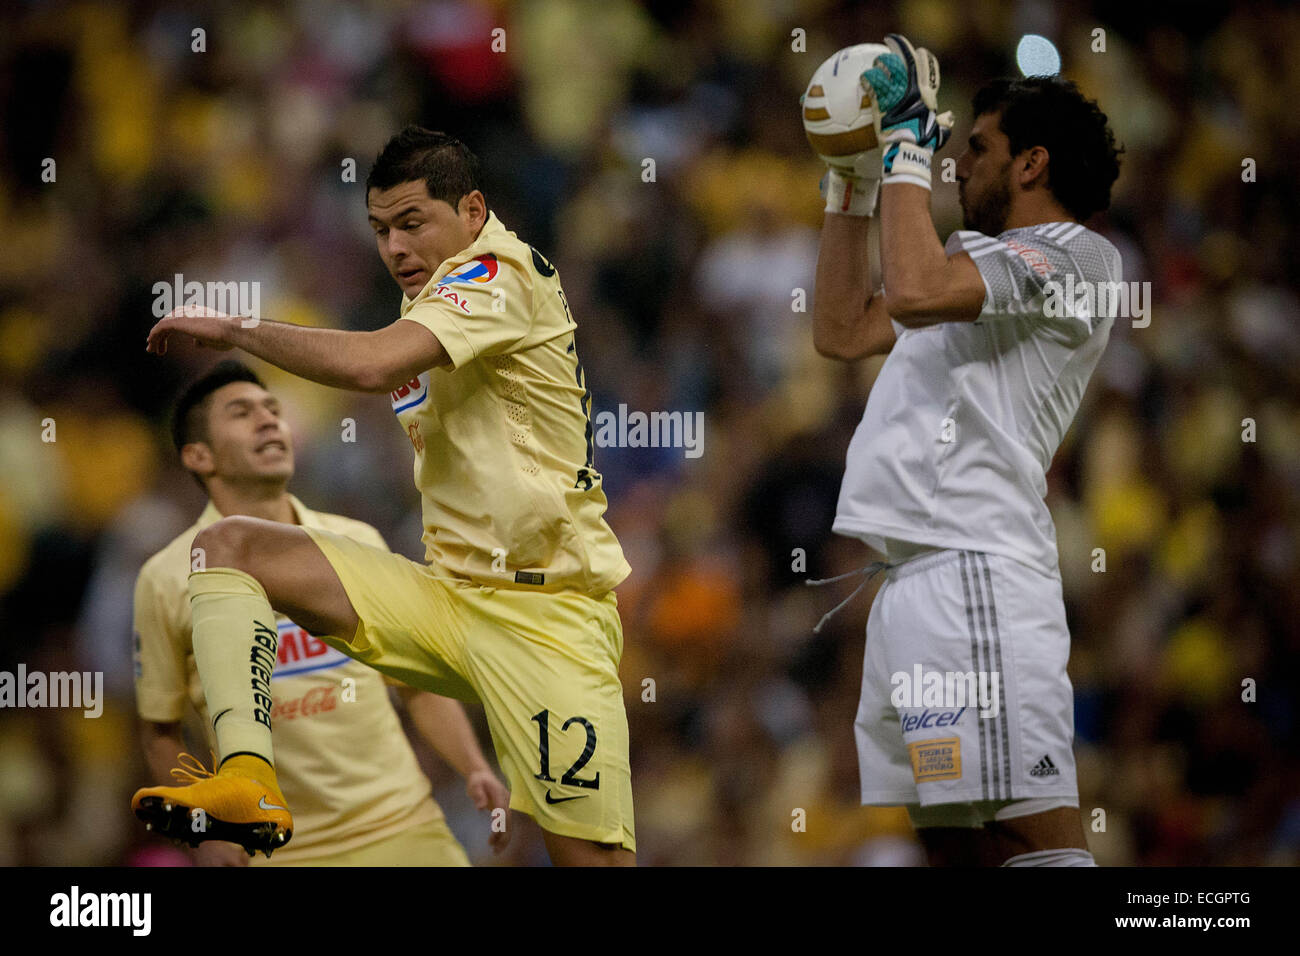 Mexico City, Mexico. 14th Dec, 2014. America's Pablo Aguilar (front L) vies with Tigres' goalkeeper Nahuen Guzman (R) during the return match of the Final of the 2014 Opening Tournmanet of the MX League in the Azteca Stadium in Mexico City, capital of Mexico, on Dec. 14, 2014. © David de la Paz/Xinhua/Alamy Live News Stock Photo